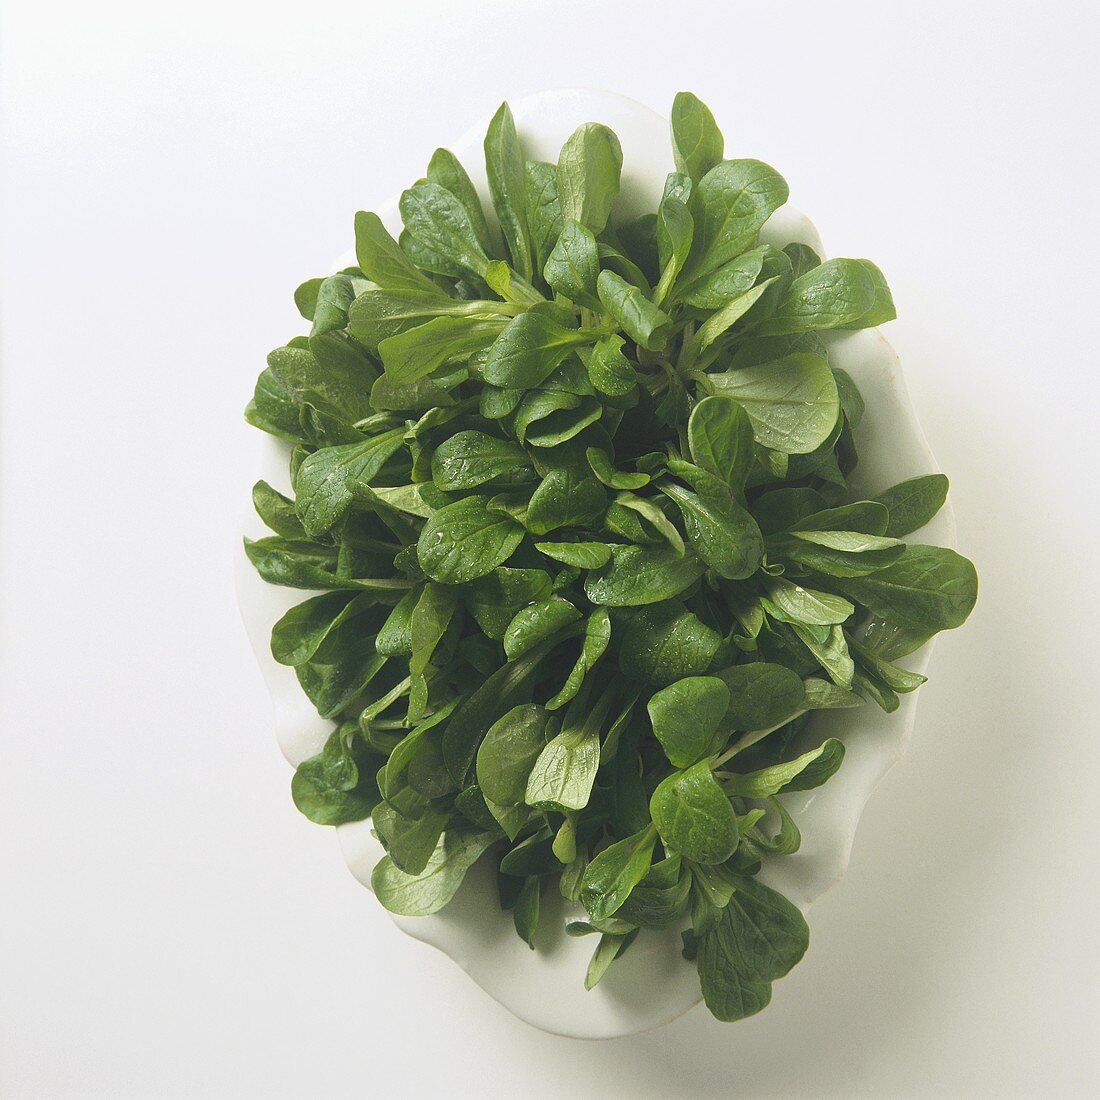 Lamb's Lettuce in a Small Bowl